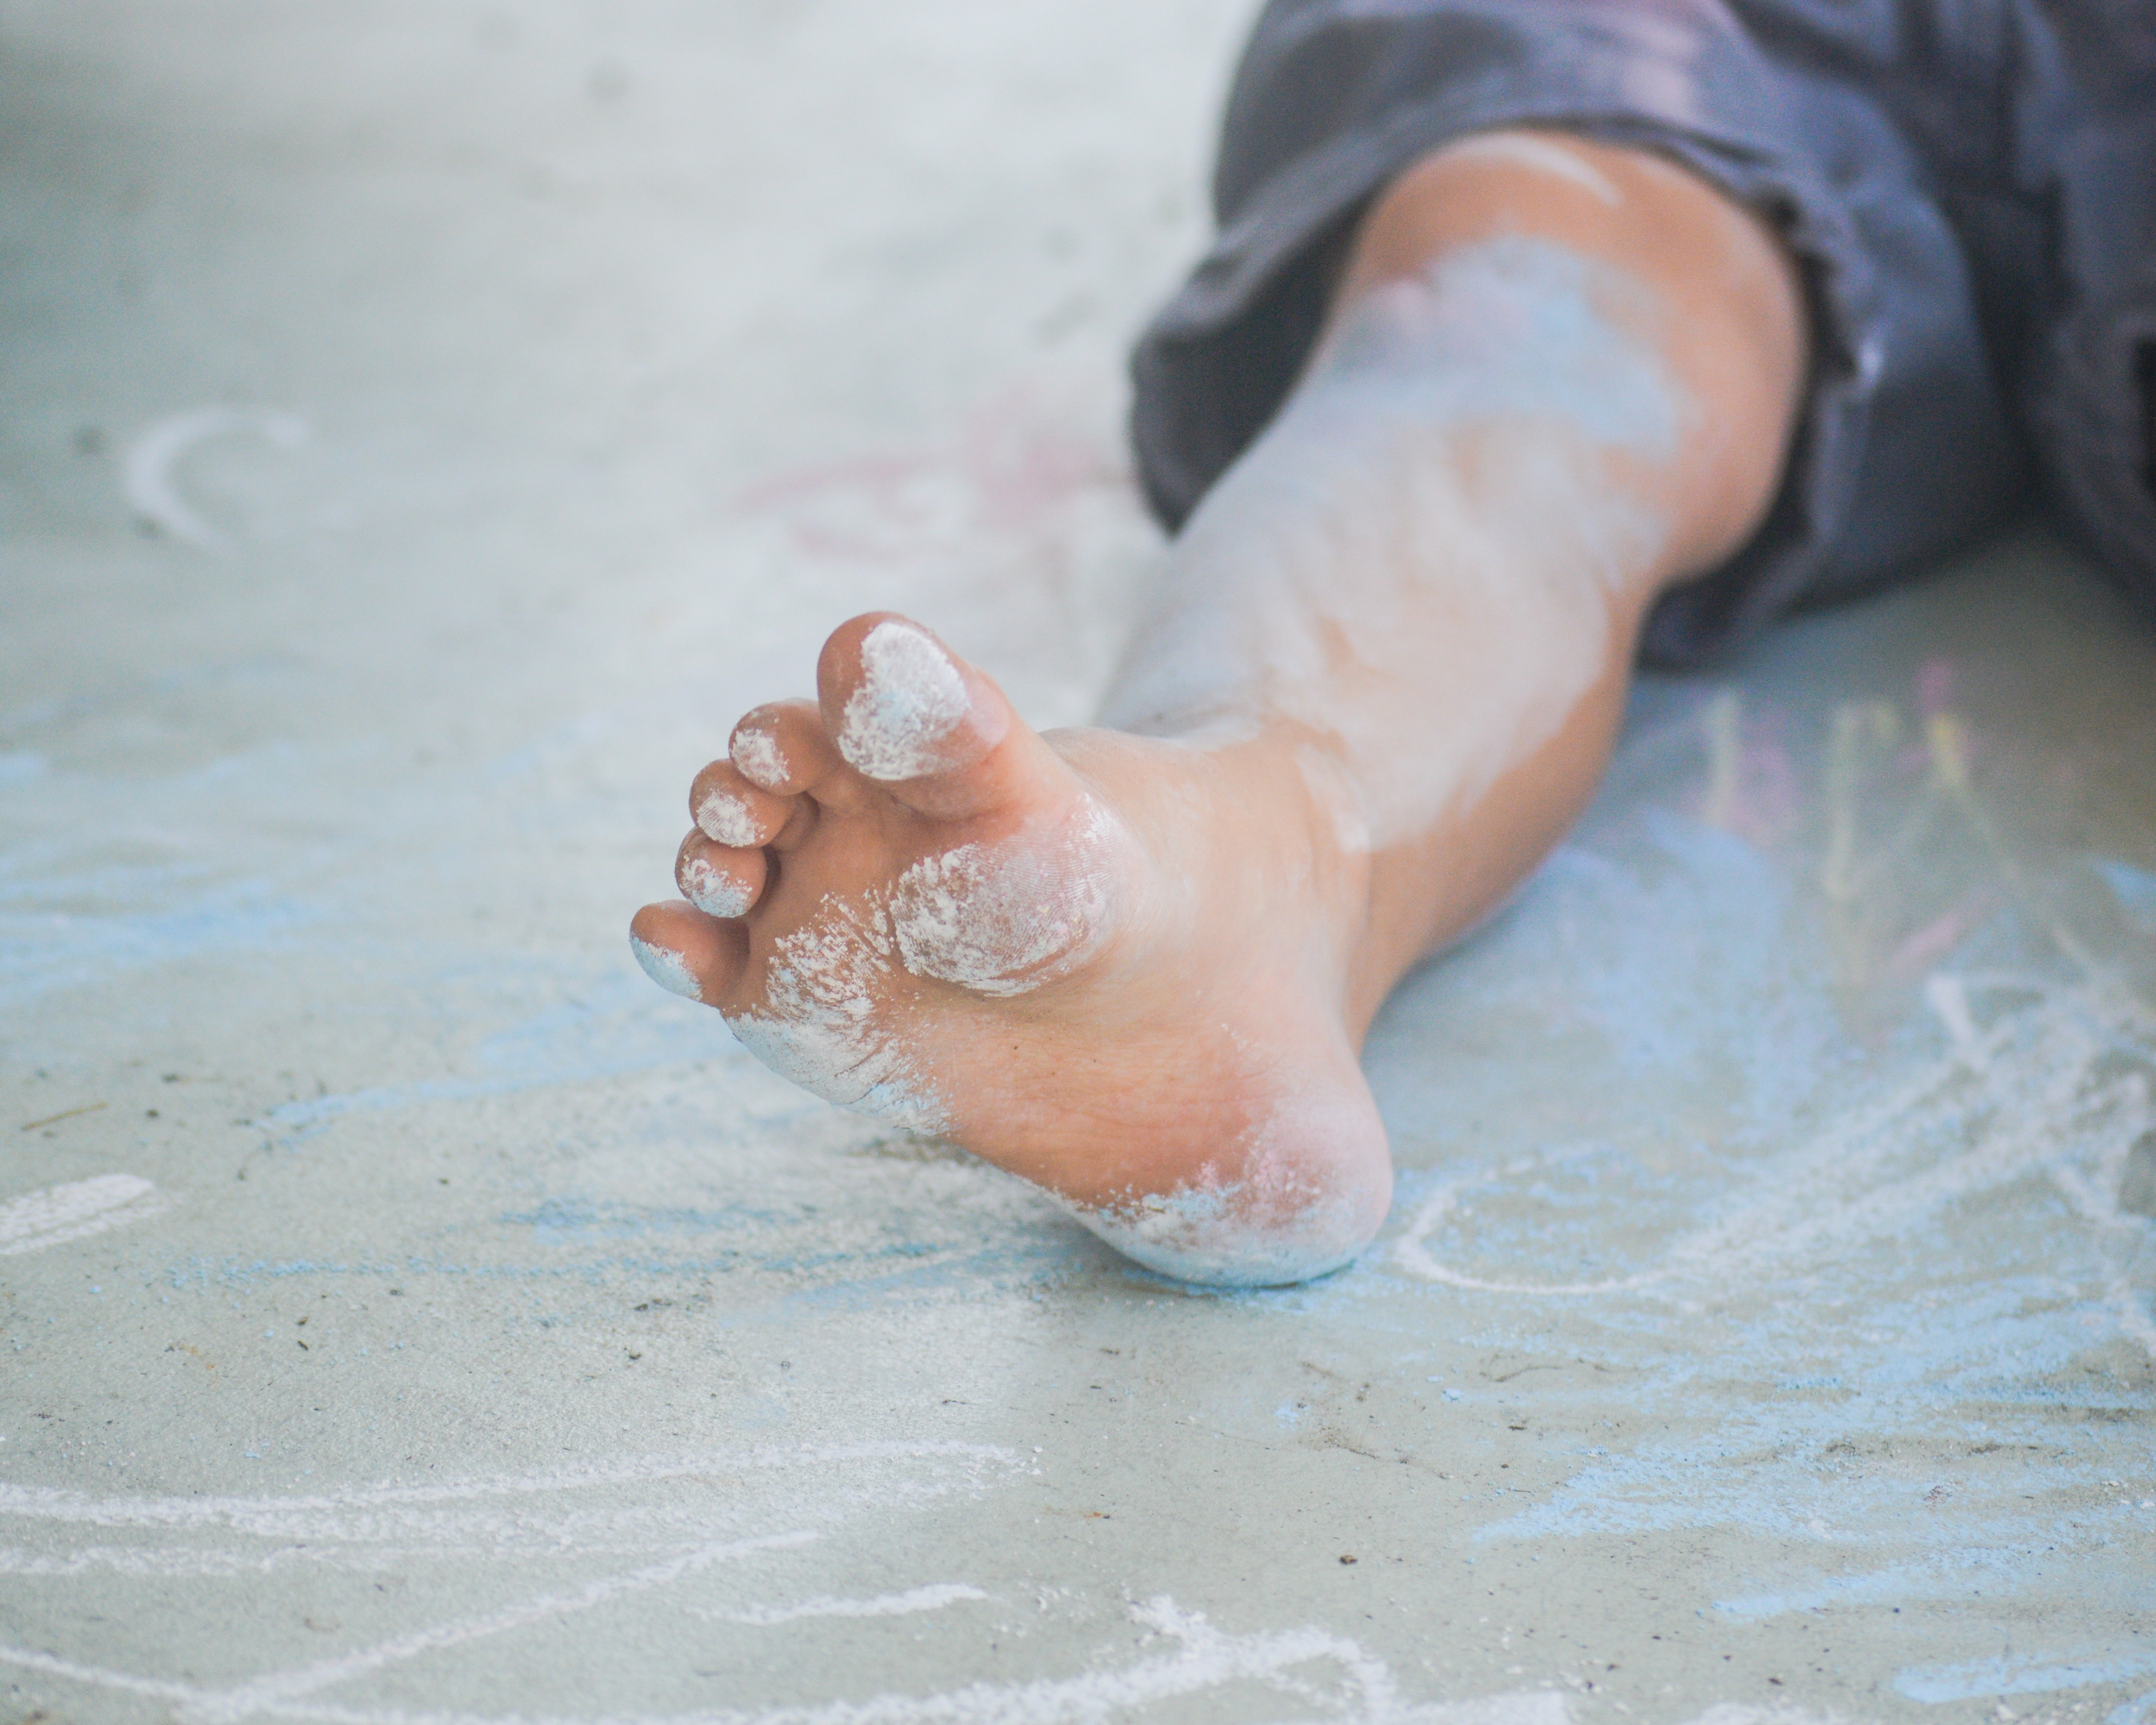 Why doesn’t my child enjoy messy play? Why don’t they like playing in the sand pit?